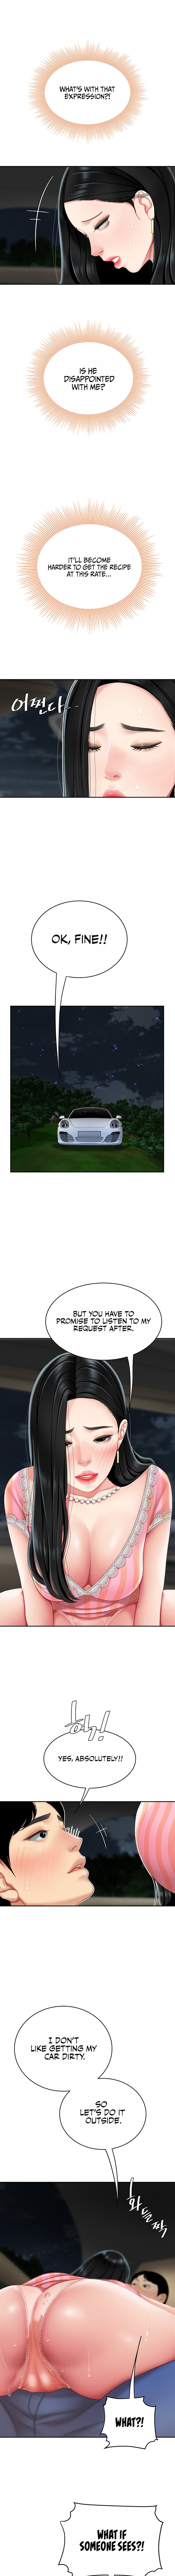 I Want A Taste Chapter 11 - Page 7